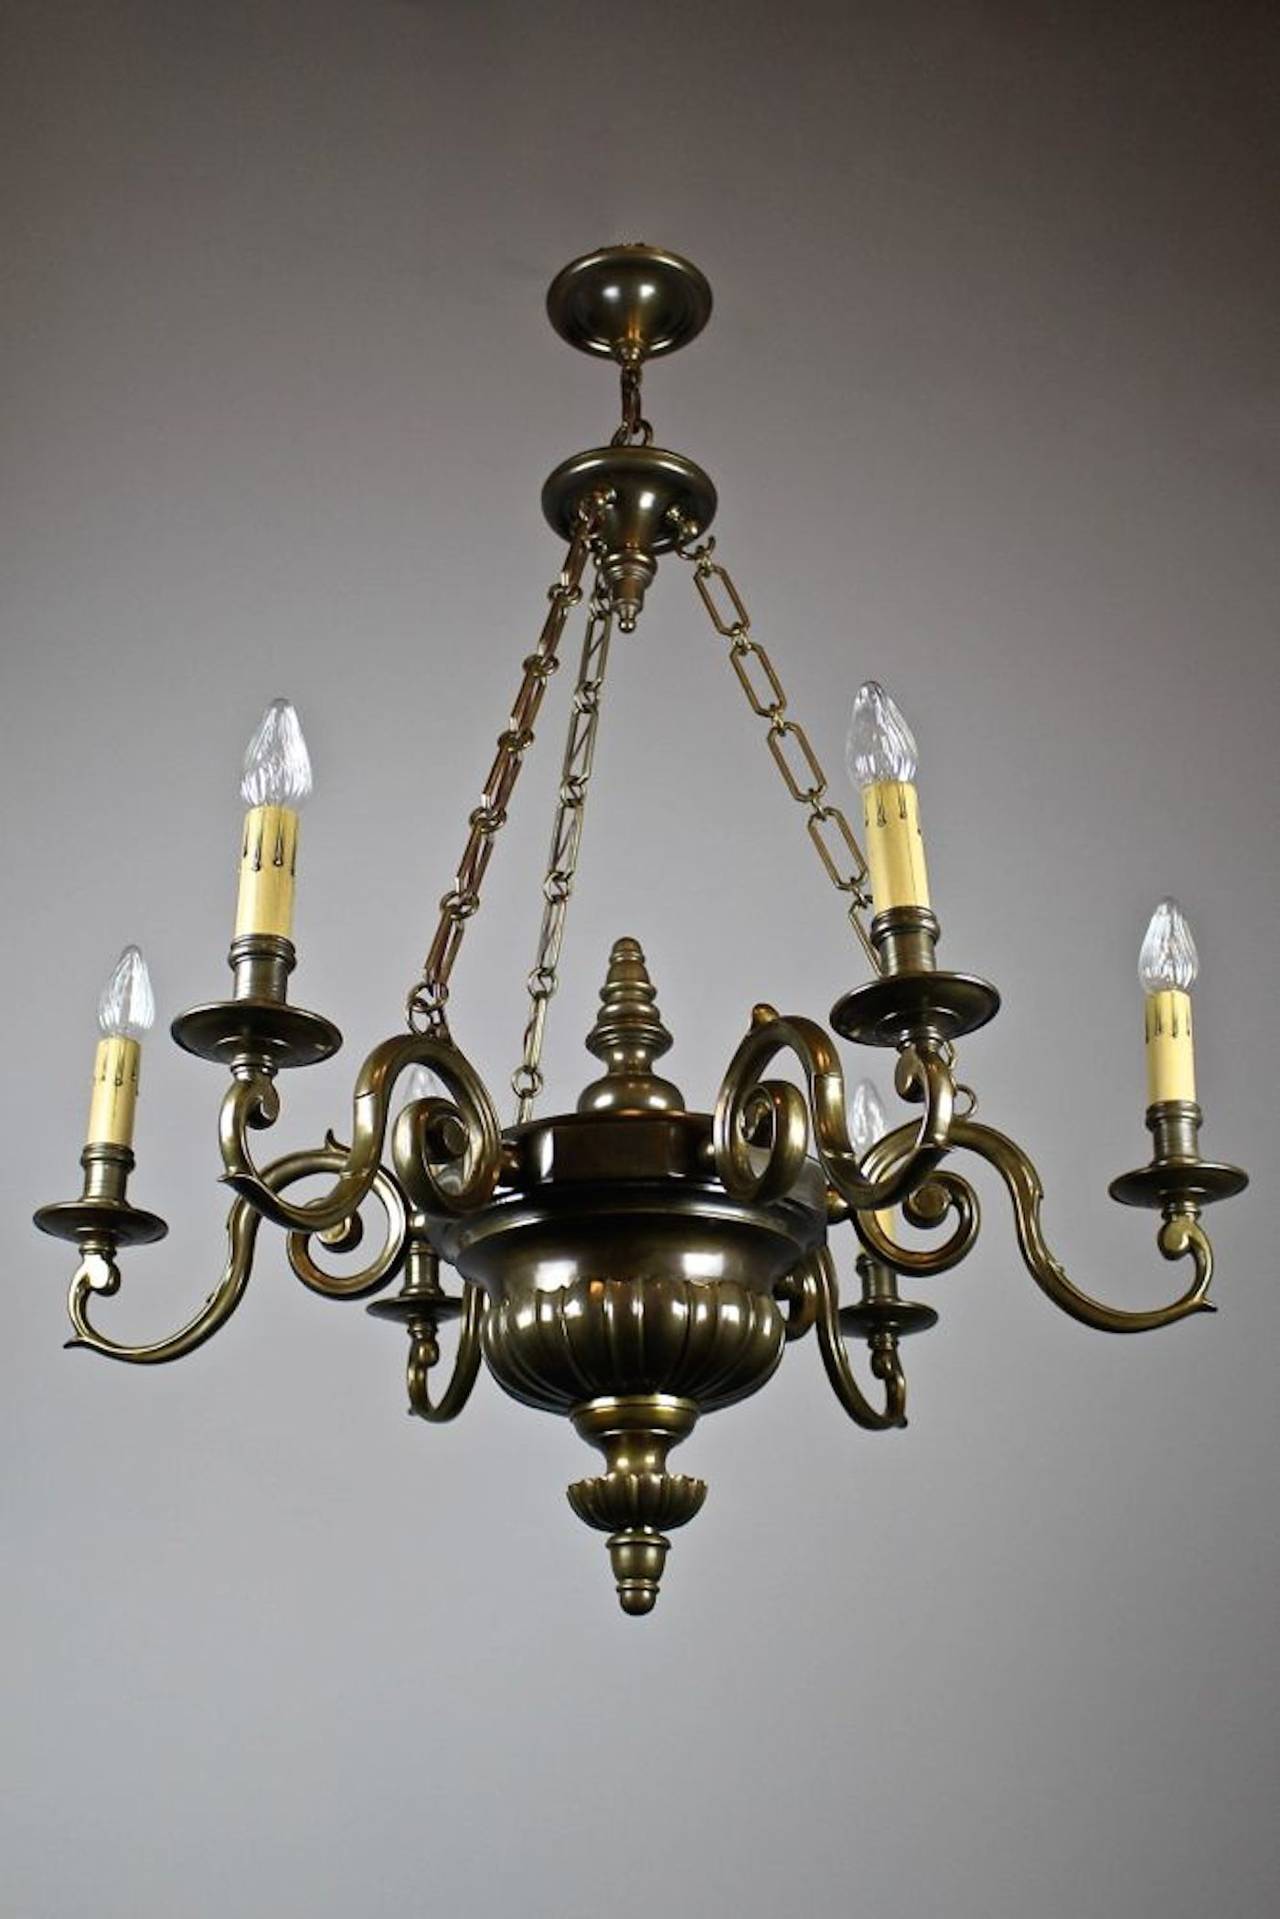 American Large Sheffield Style Lighting Fixture with Candle Arms (6-light) For Sale